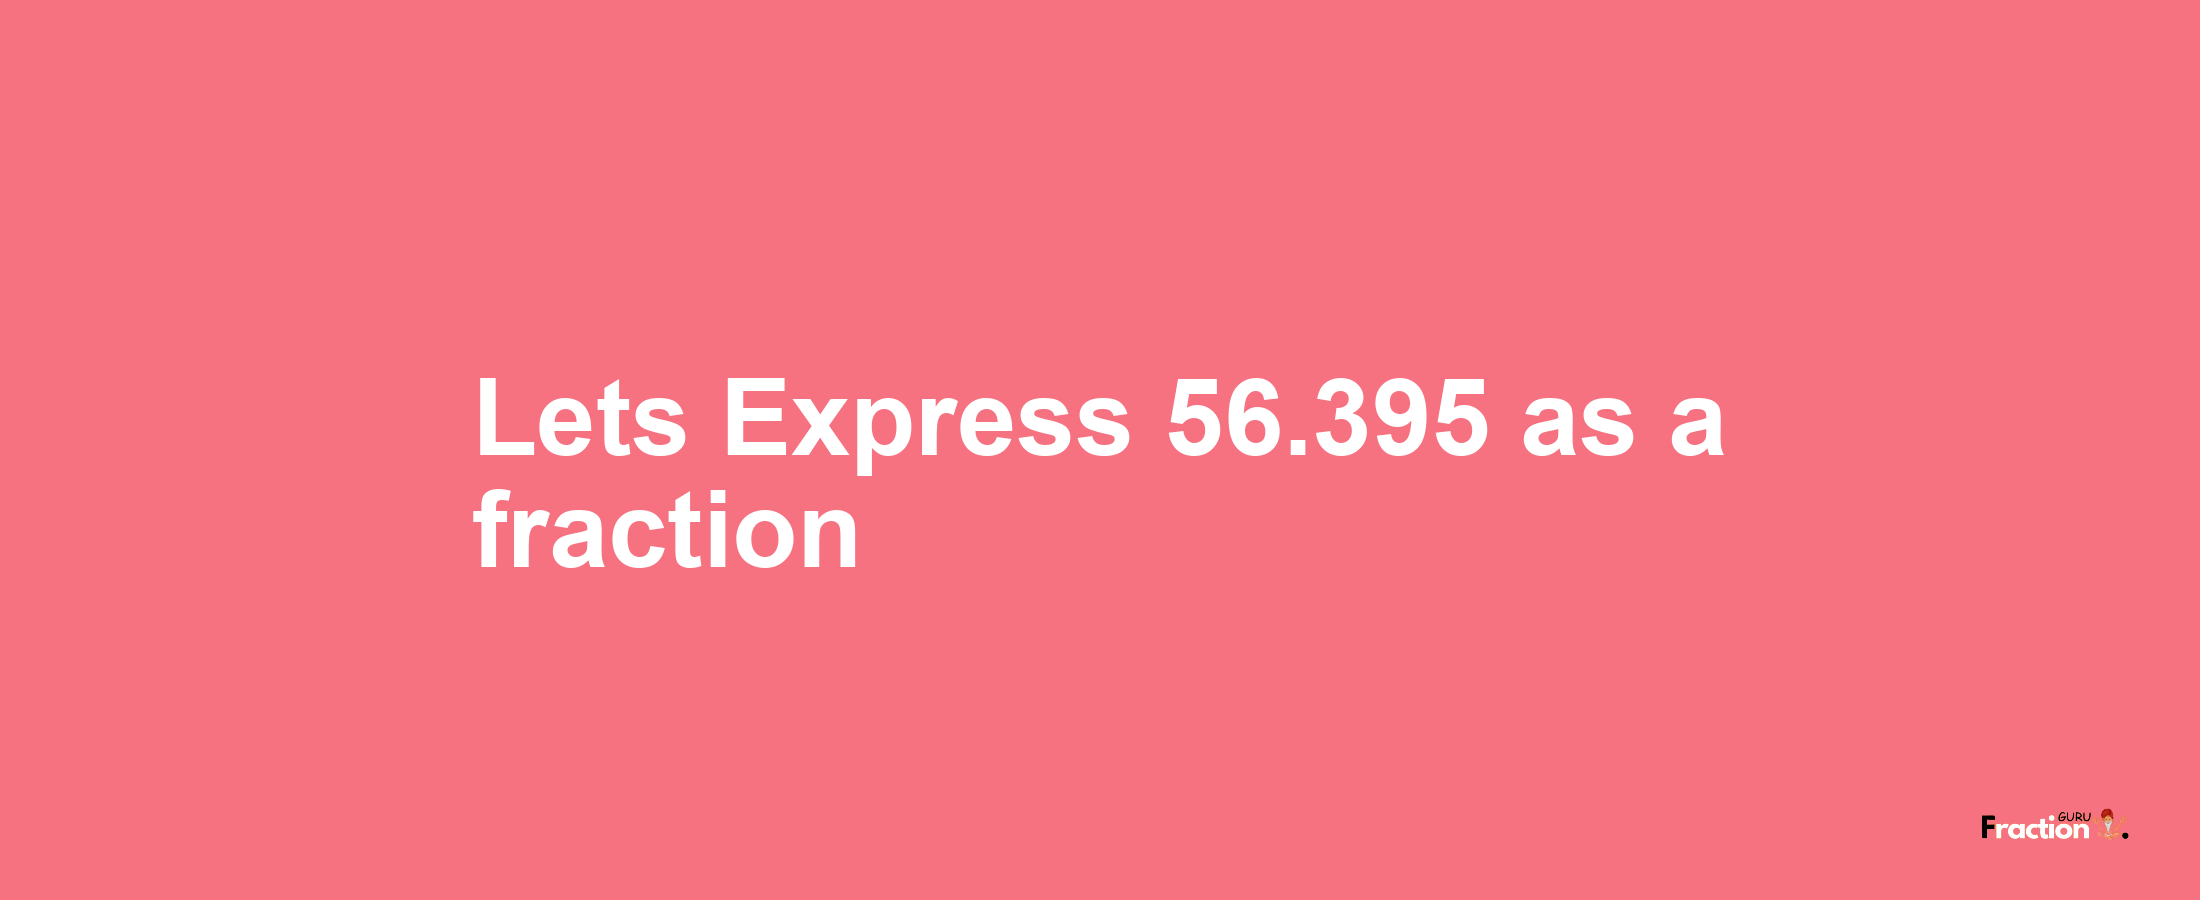 Lets Express 56.395 as afraction